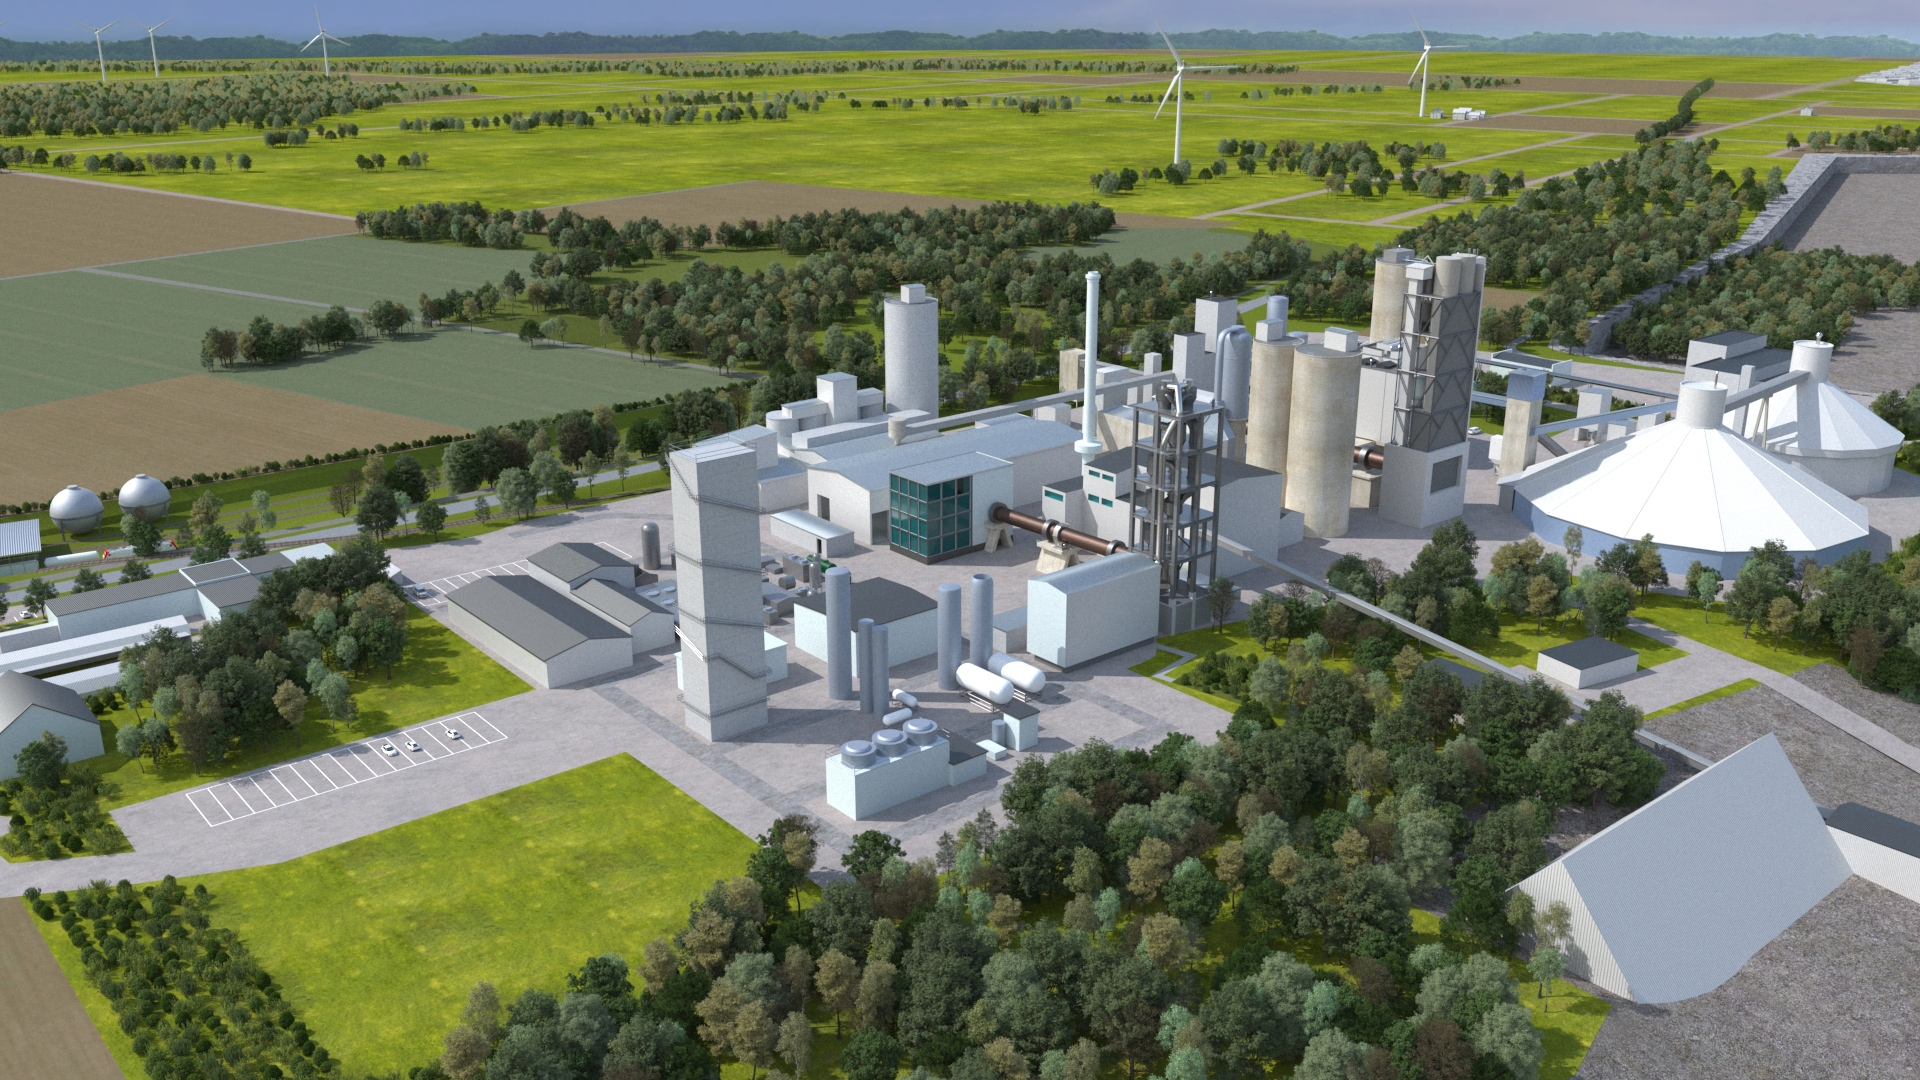 Three-dimensional visualisation of a cement plant